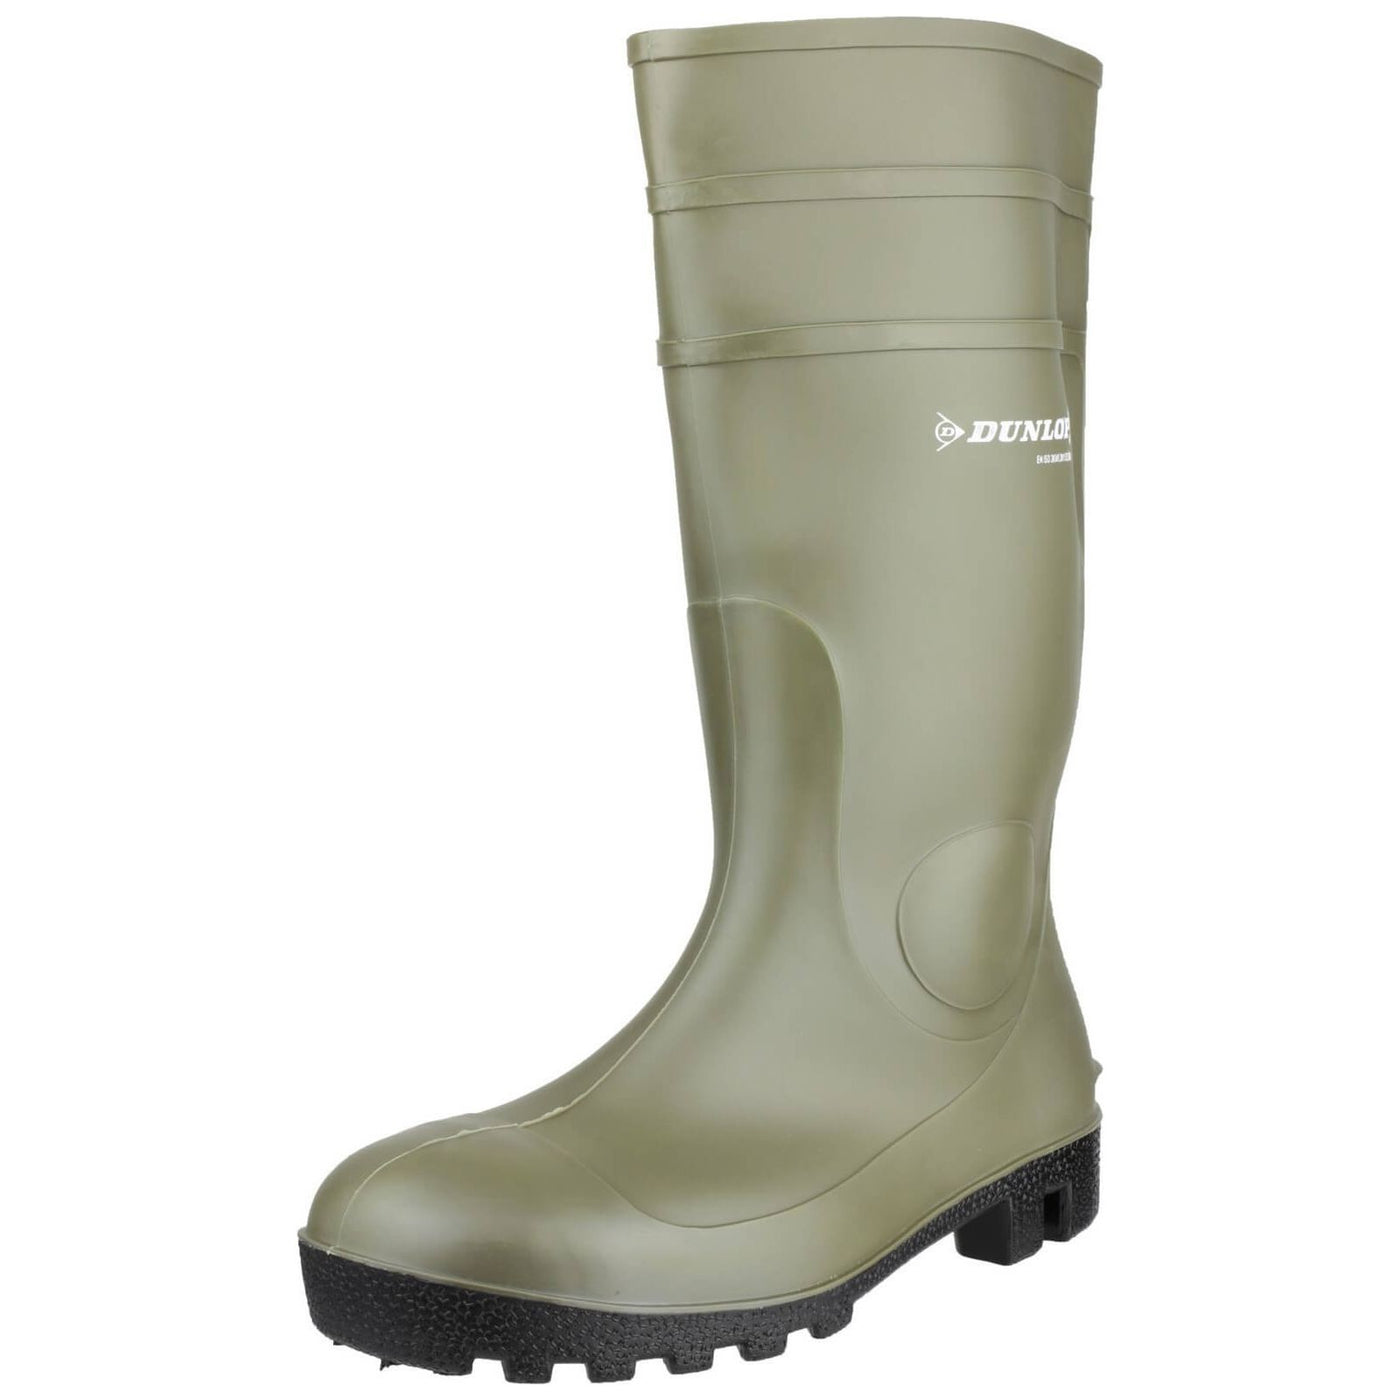 Dunlop Protomastor S5 Safety Wellies  - Mens - Sale